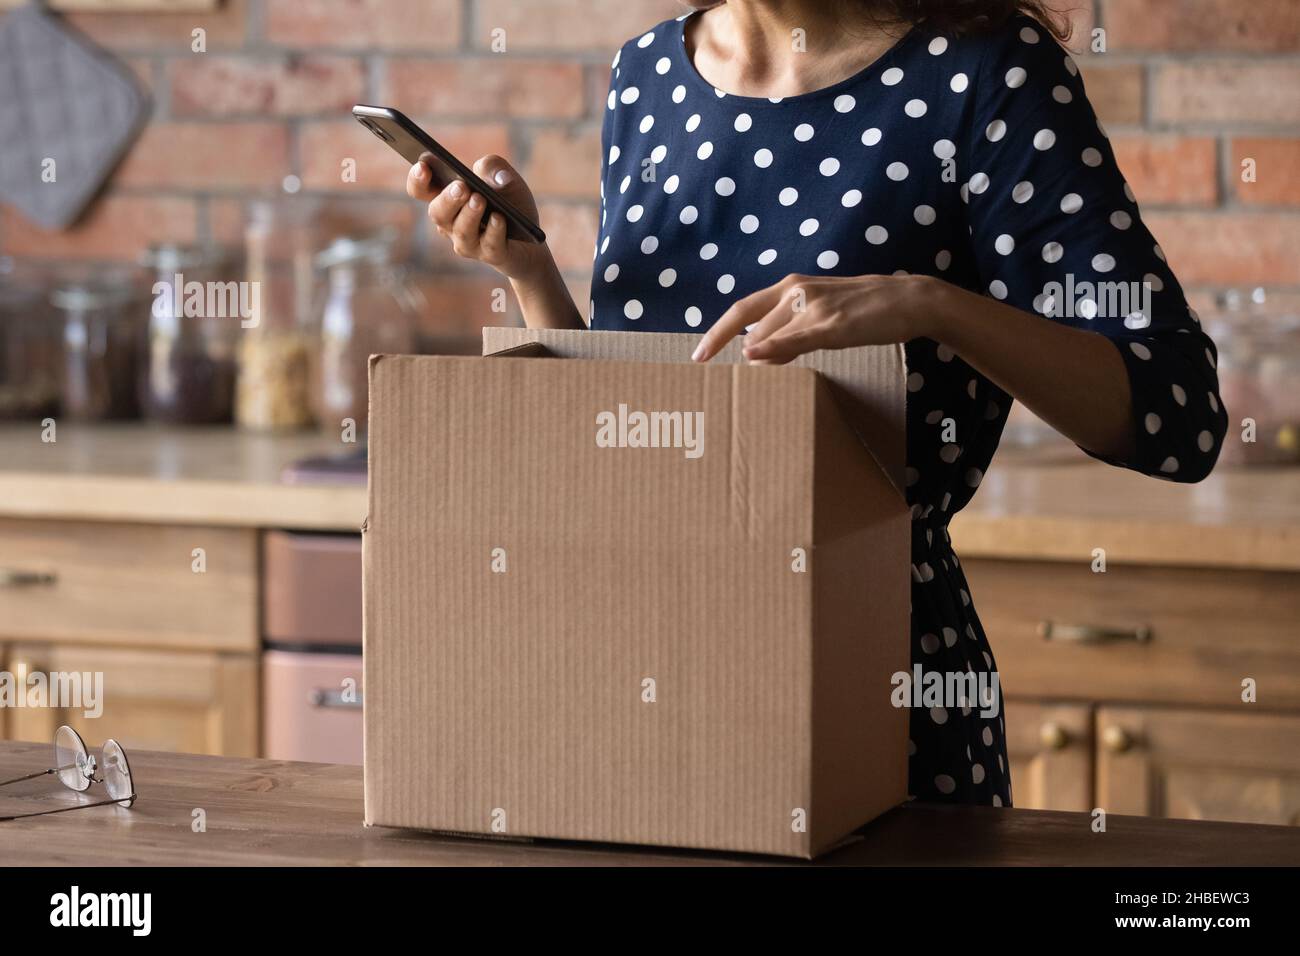 Close up cropped young female customer unpacking carton parcel. Stock Photo